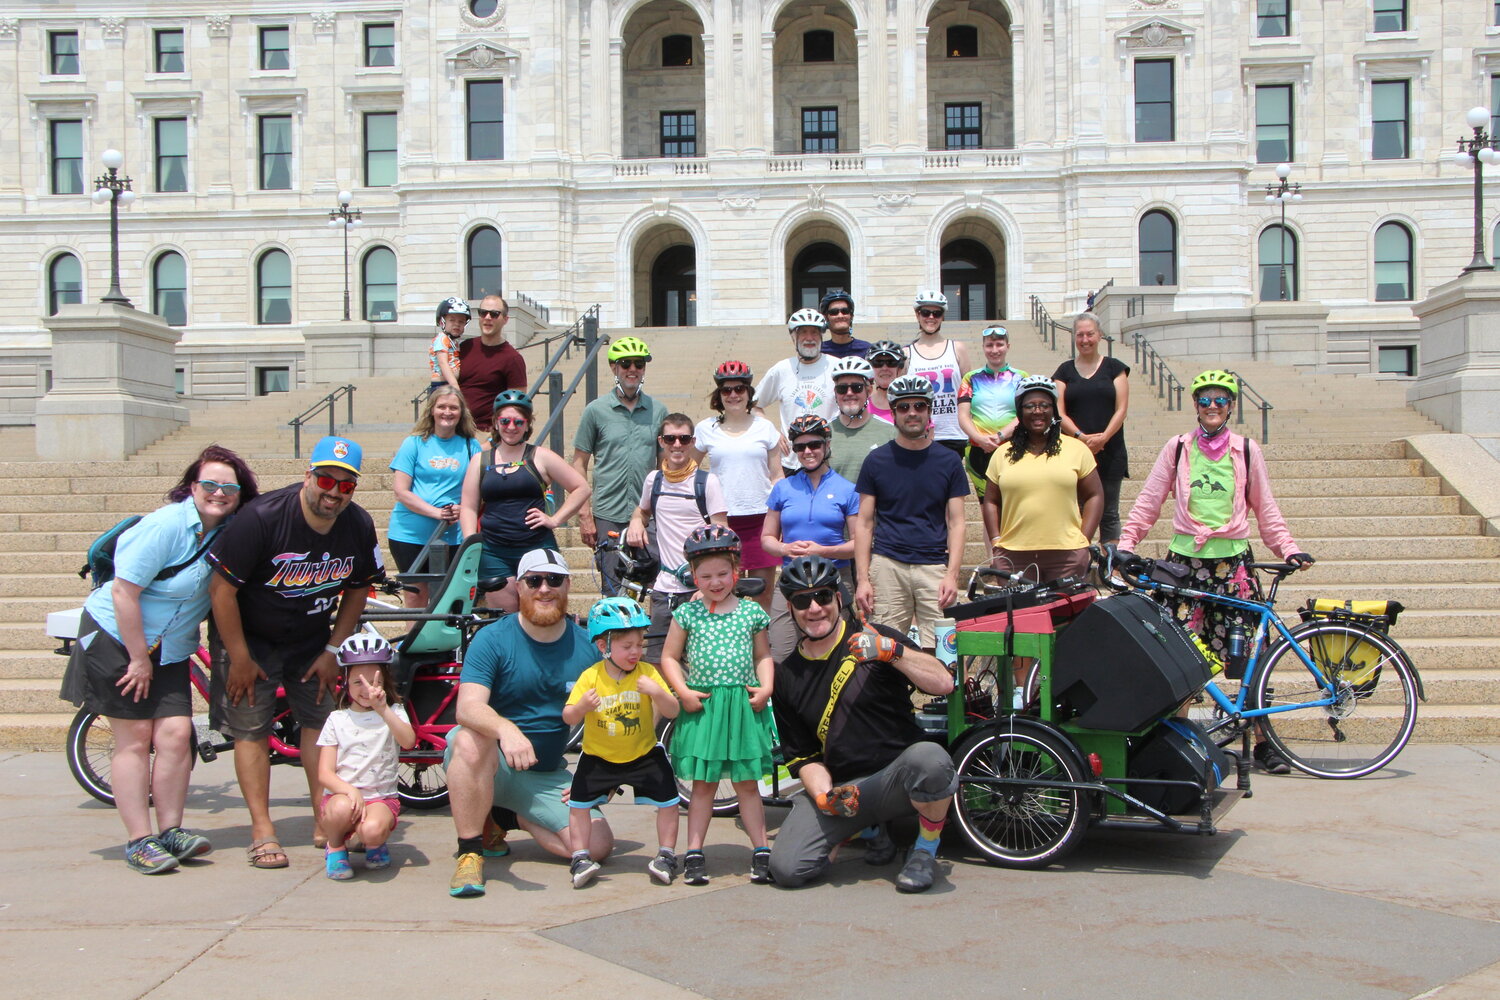 On Saturday, June 17 the Joyful Riders Club gathered at the Minnesota State Capitol before leaving for the DJ dance party ride at the Frogtown Fair.